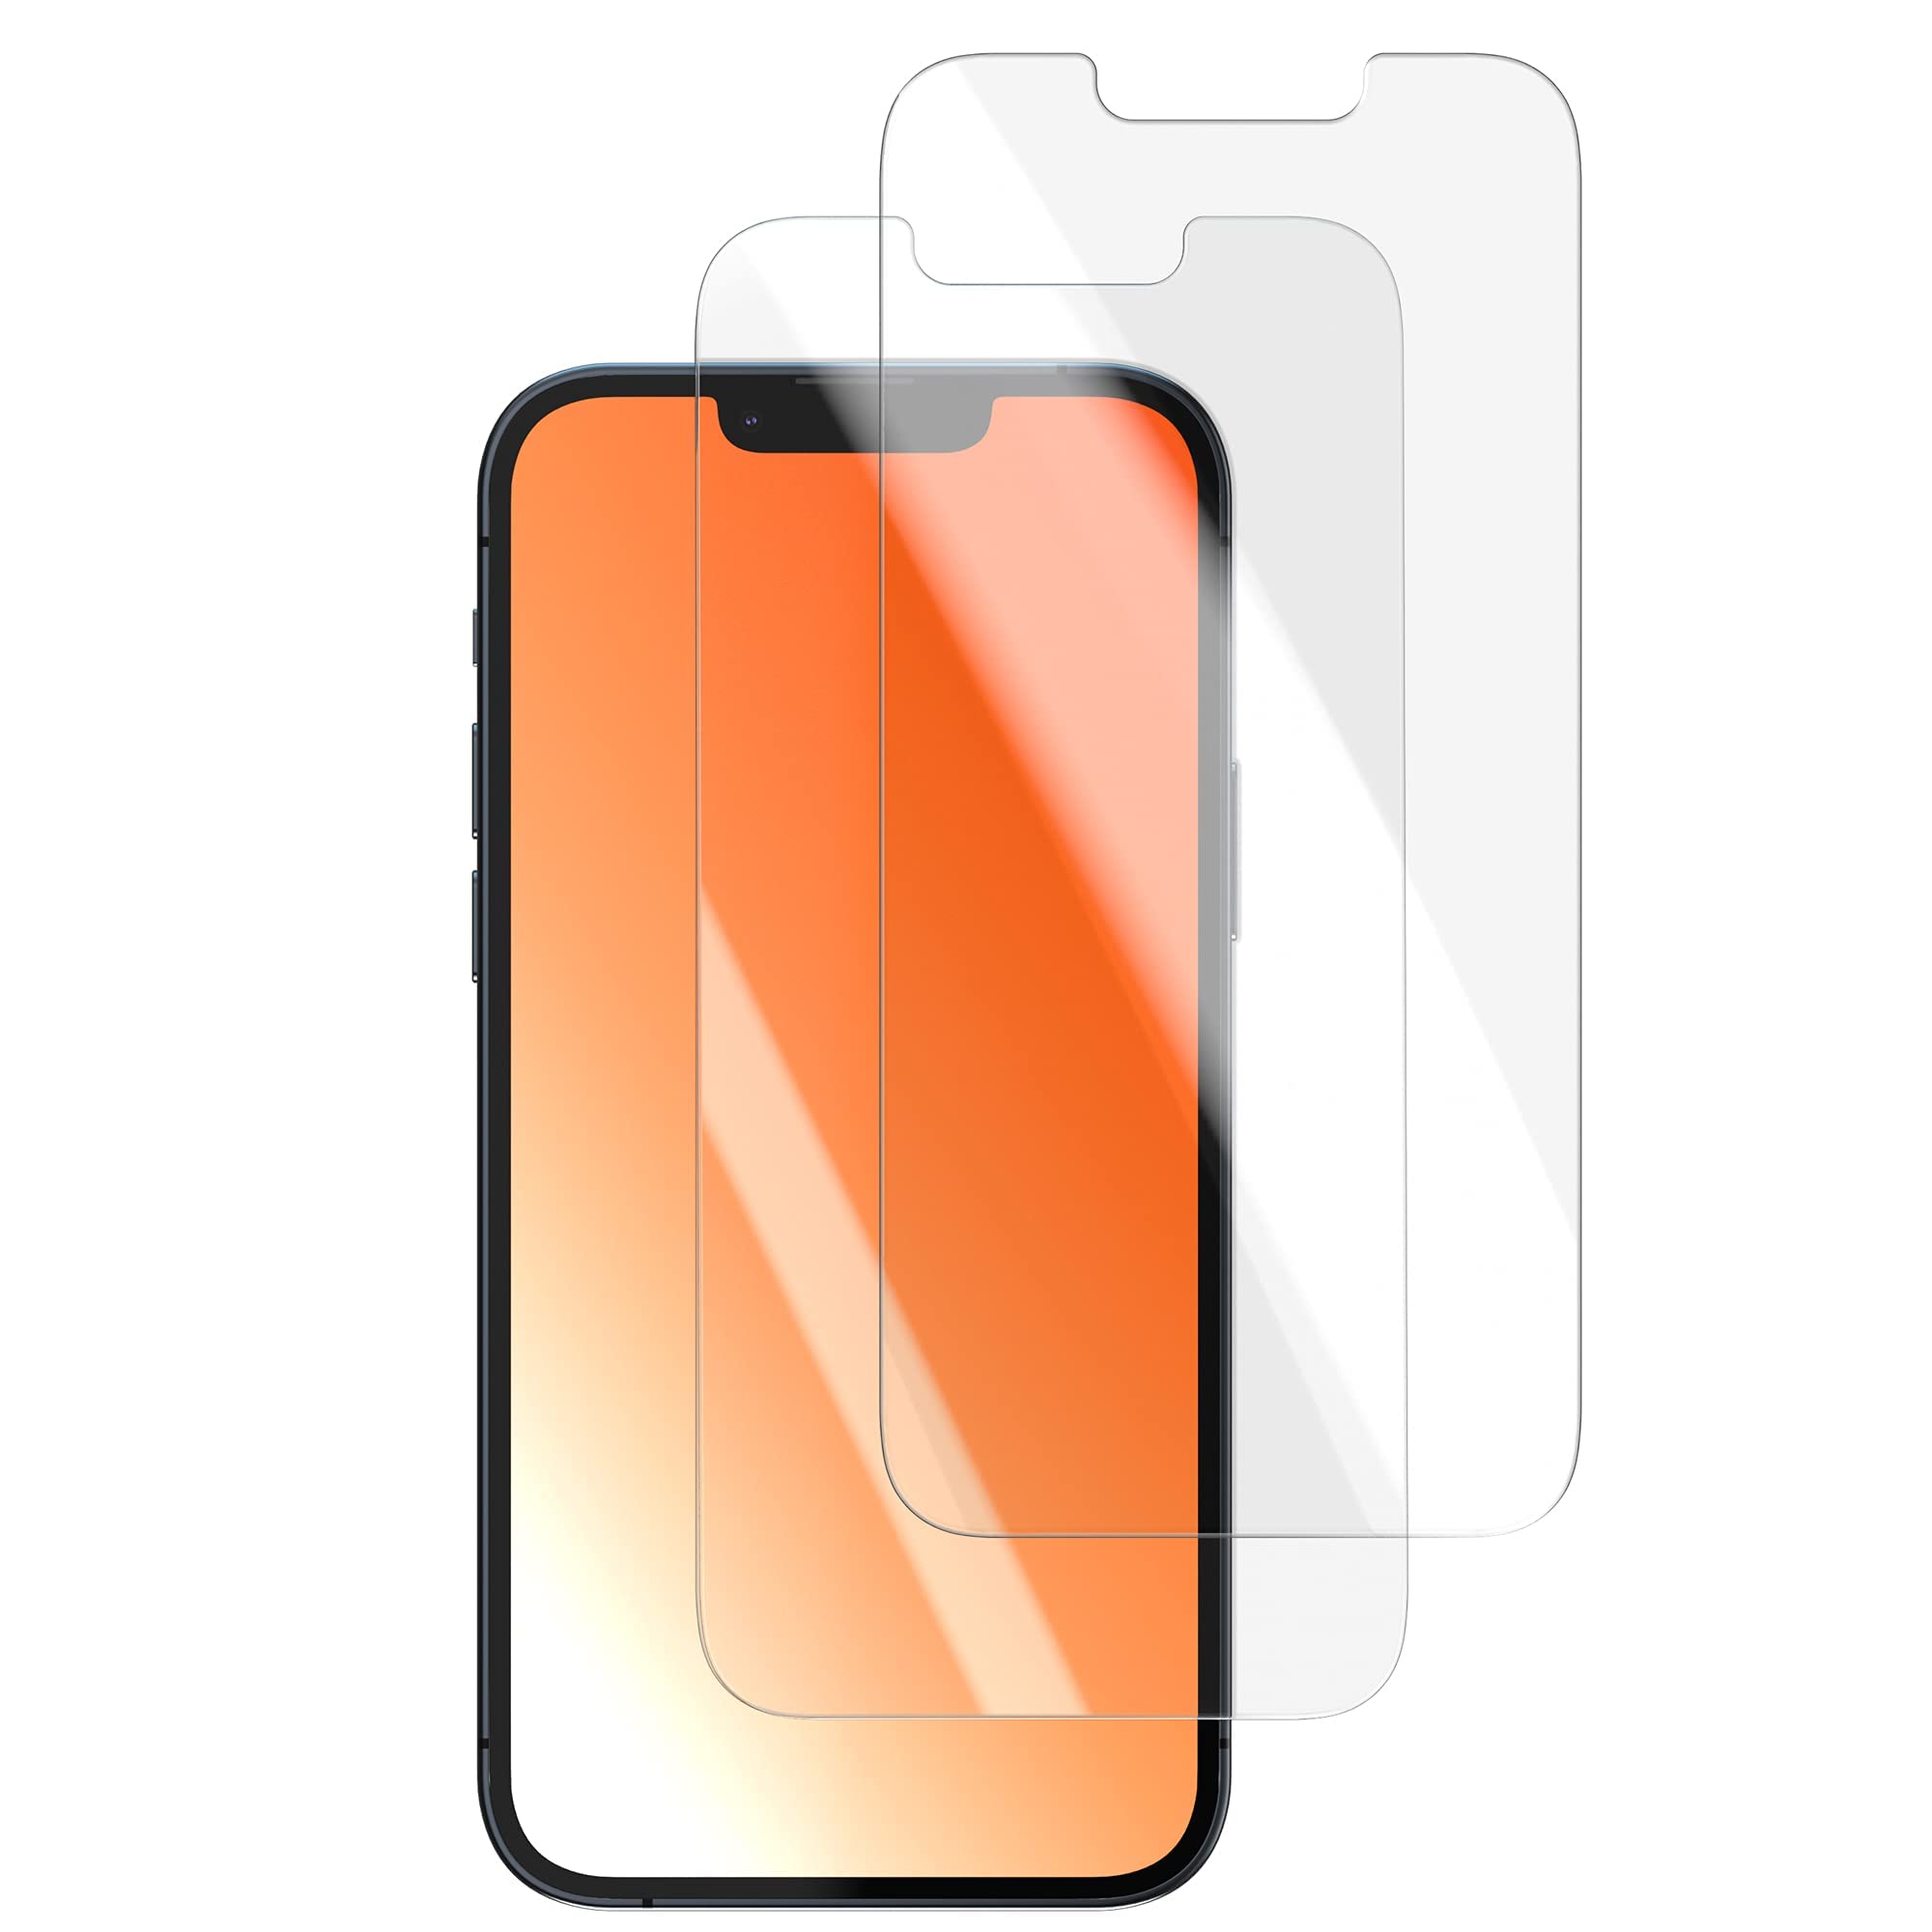 Screen Protector Compatibility: Finding The Right Screen Protector For IPhone 11